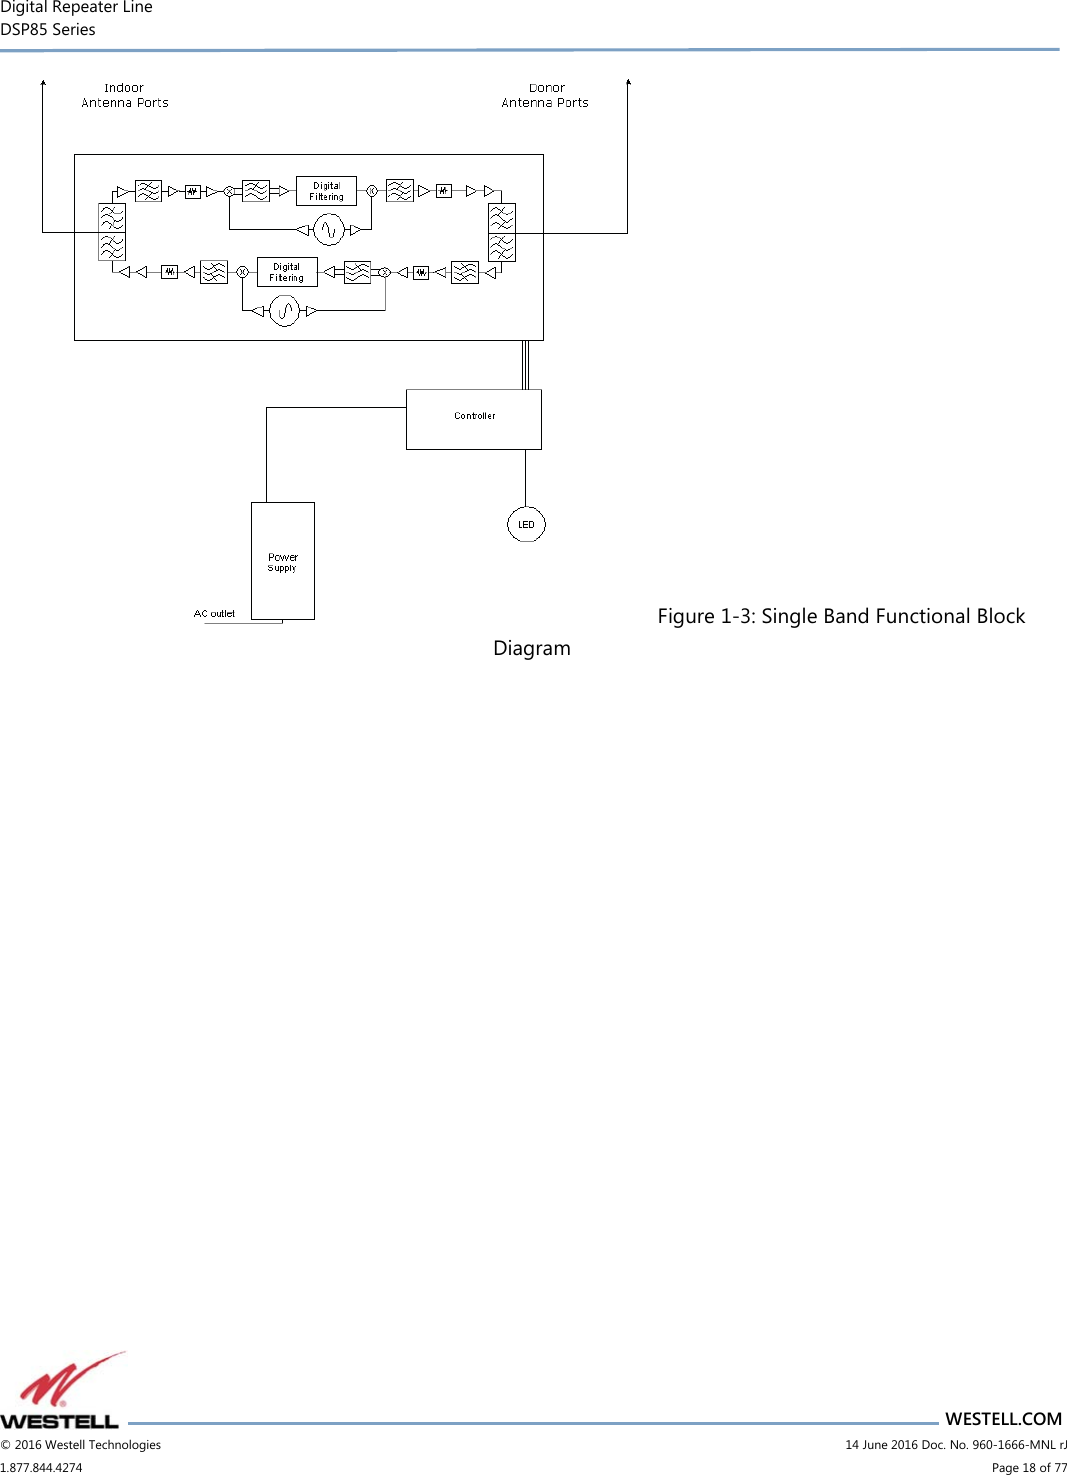 Digital Repeater Line DSP85 Series                       WESTELL.COM © 2016 Westell Technologies                         14 June 2016 Doc. No. 960-1666-MNL rJ 1.877.844.4274                             Page 18 of 77  Figure 1-3: Single Band Functional Block Diagram    